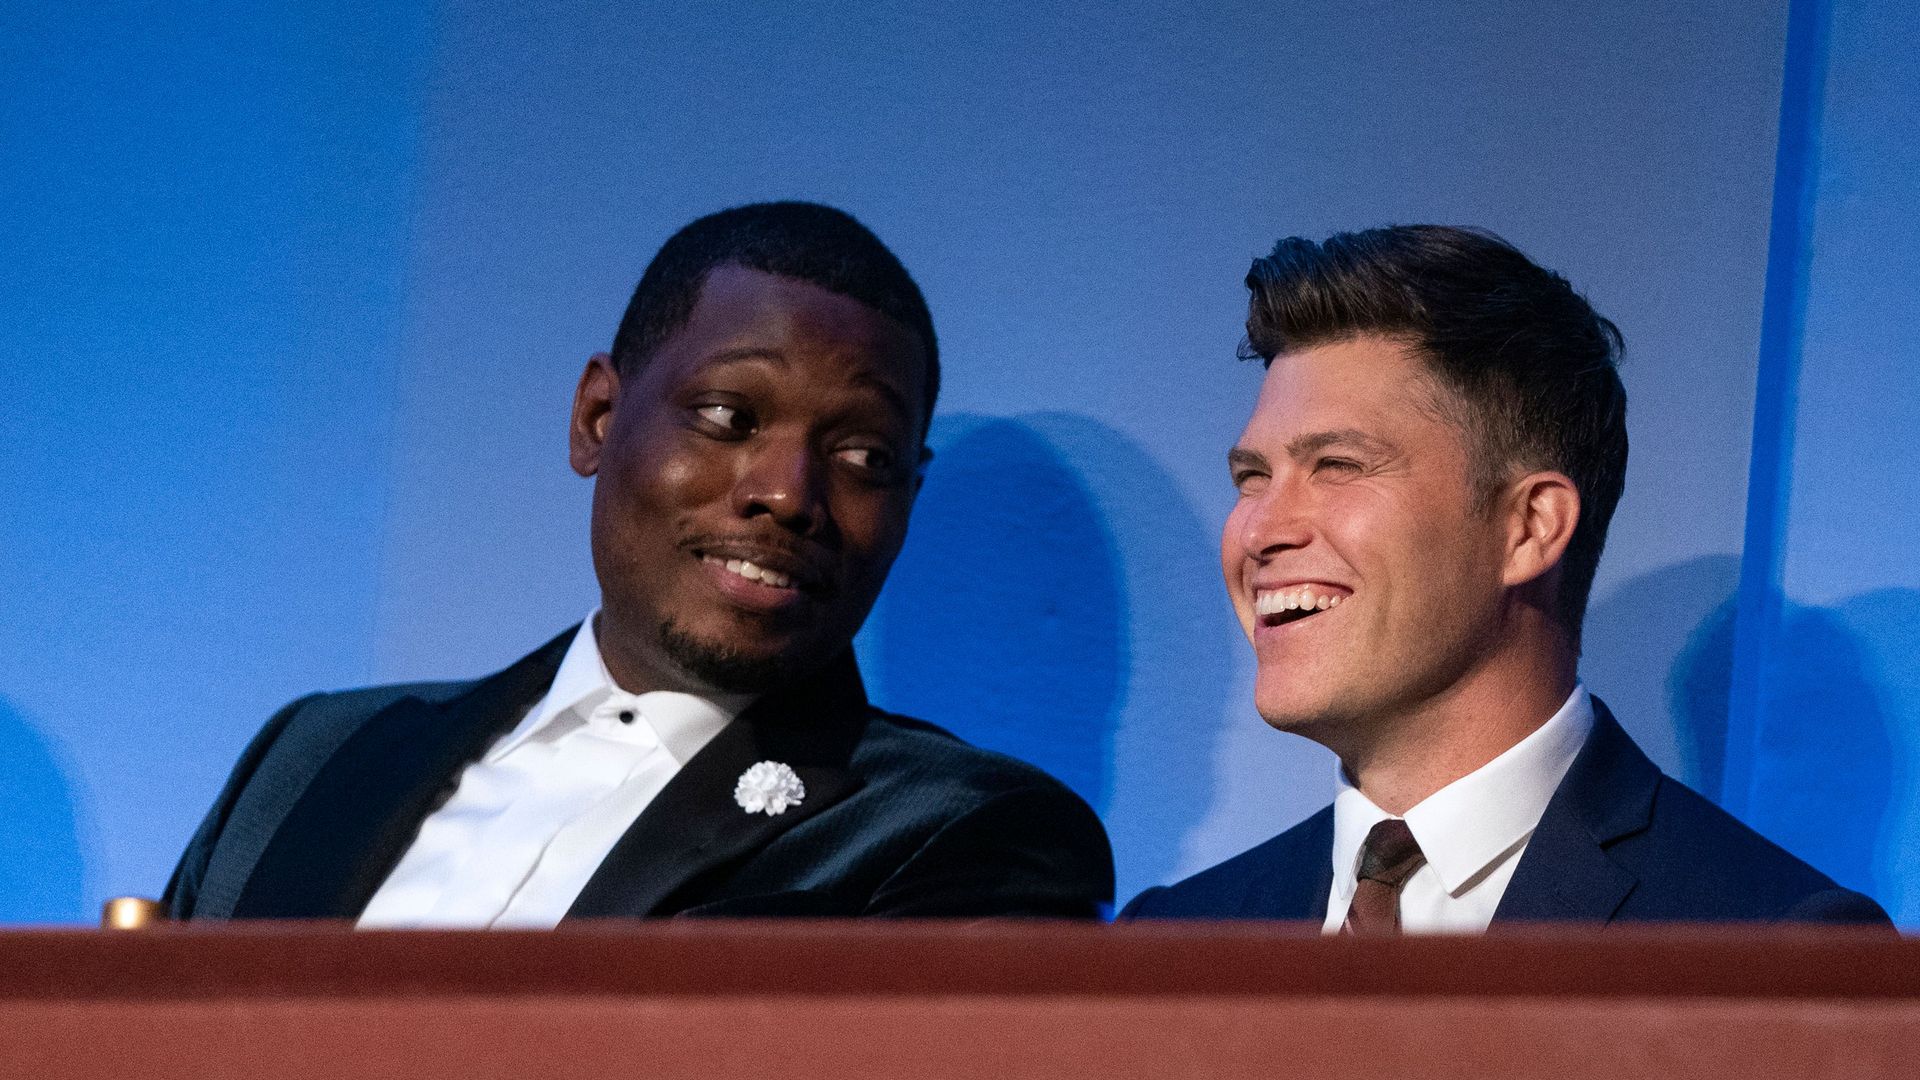 Michael Che, left, looks at Colin Jost, right, who is smiling. 